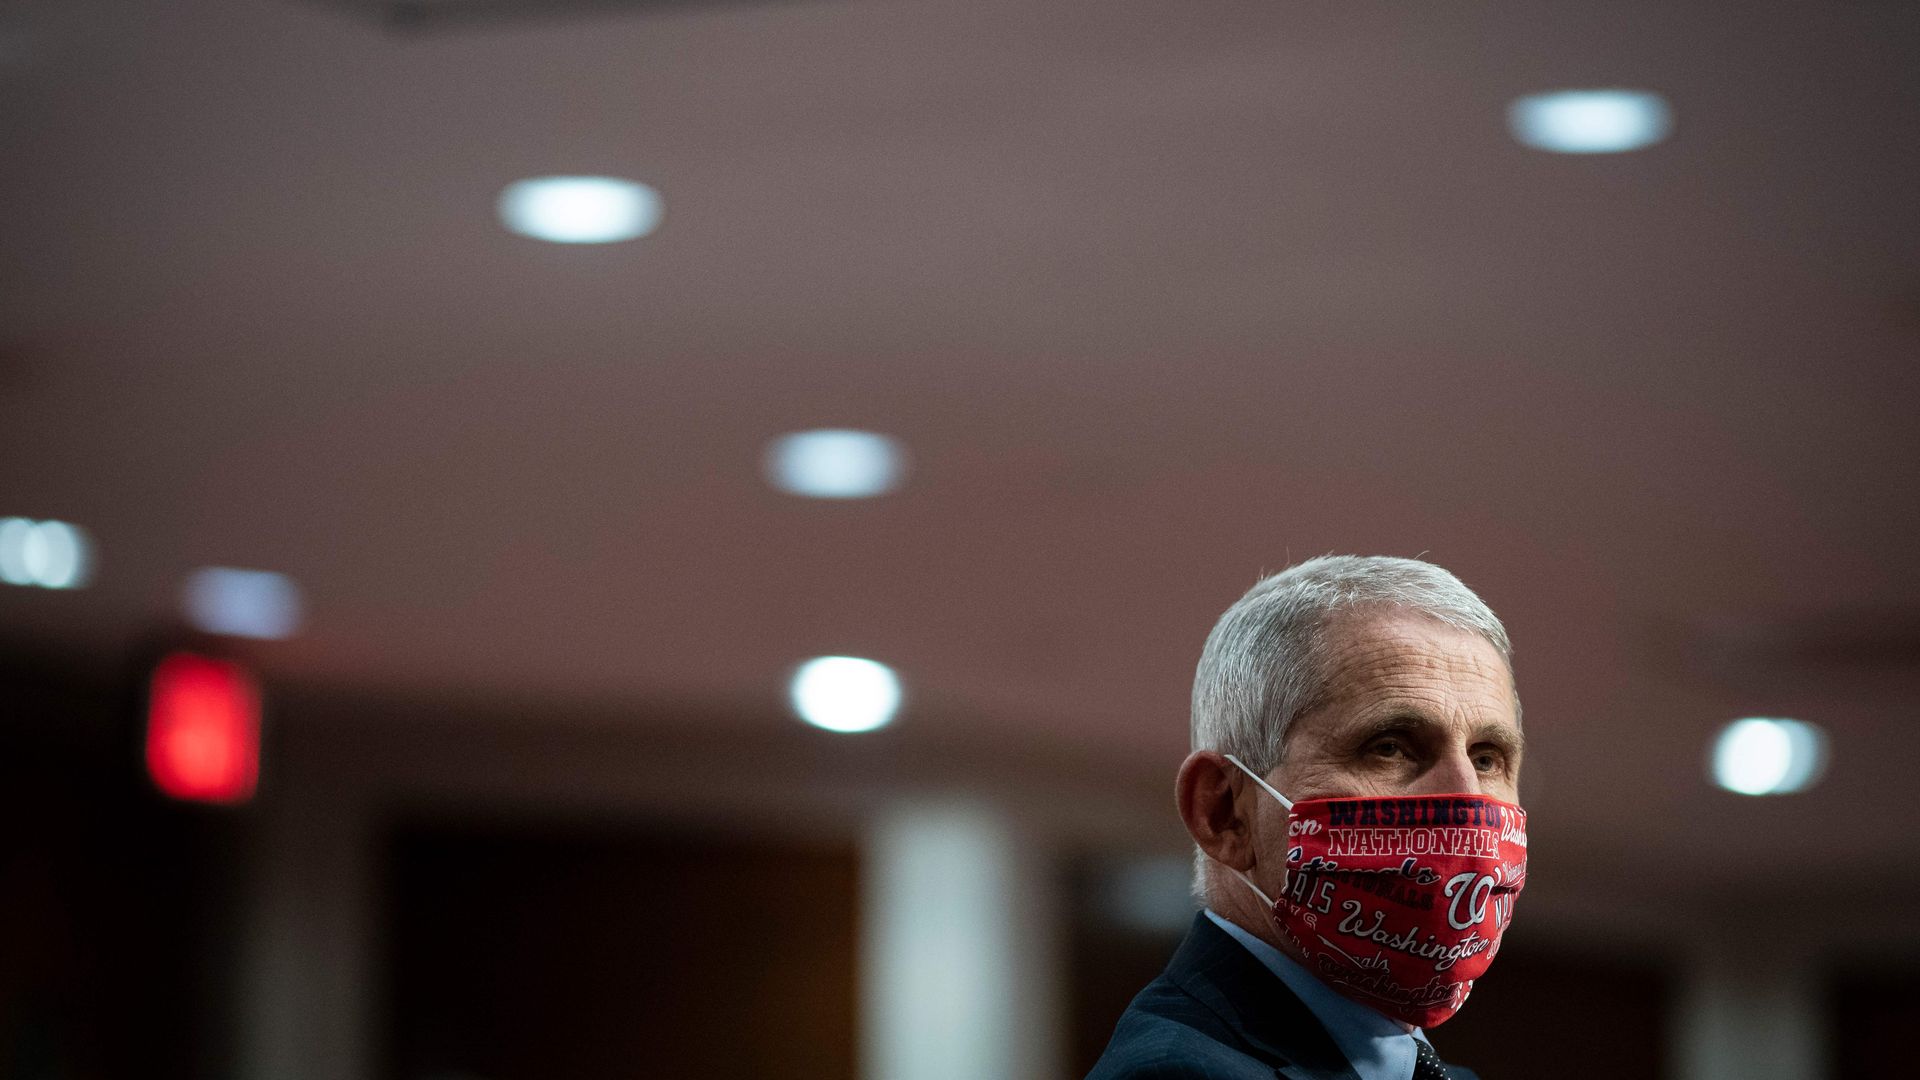 Photo of Dr. Anthony Fauci wearing a Washington Nationals themed face mask